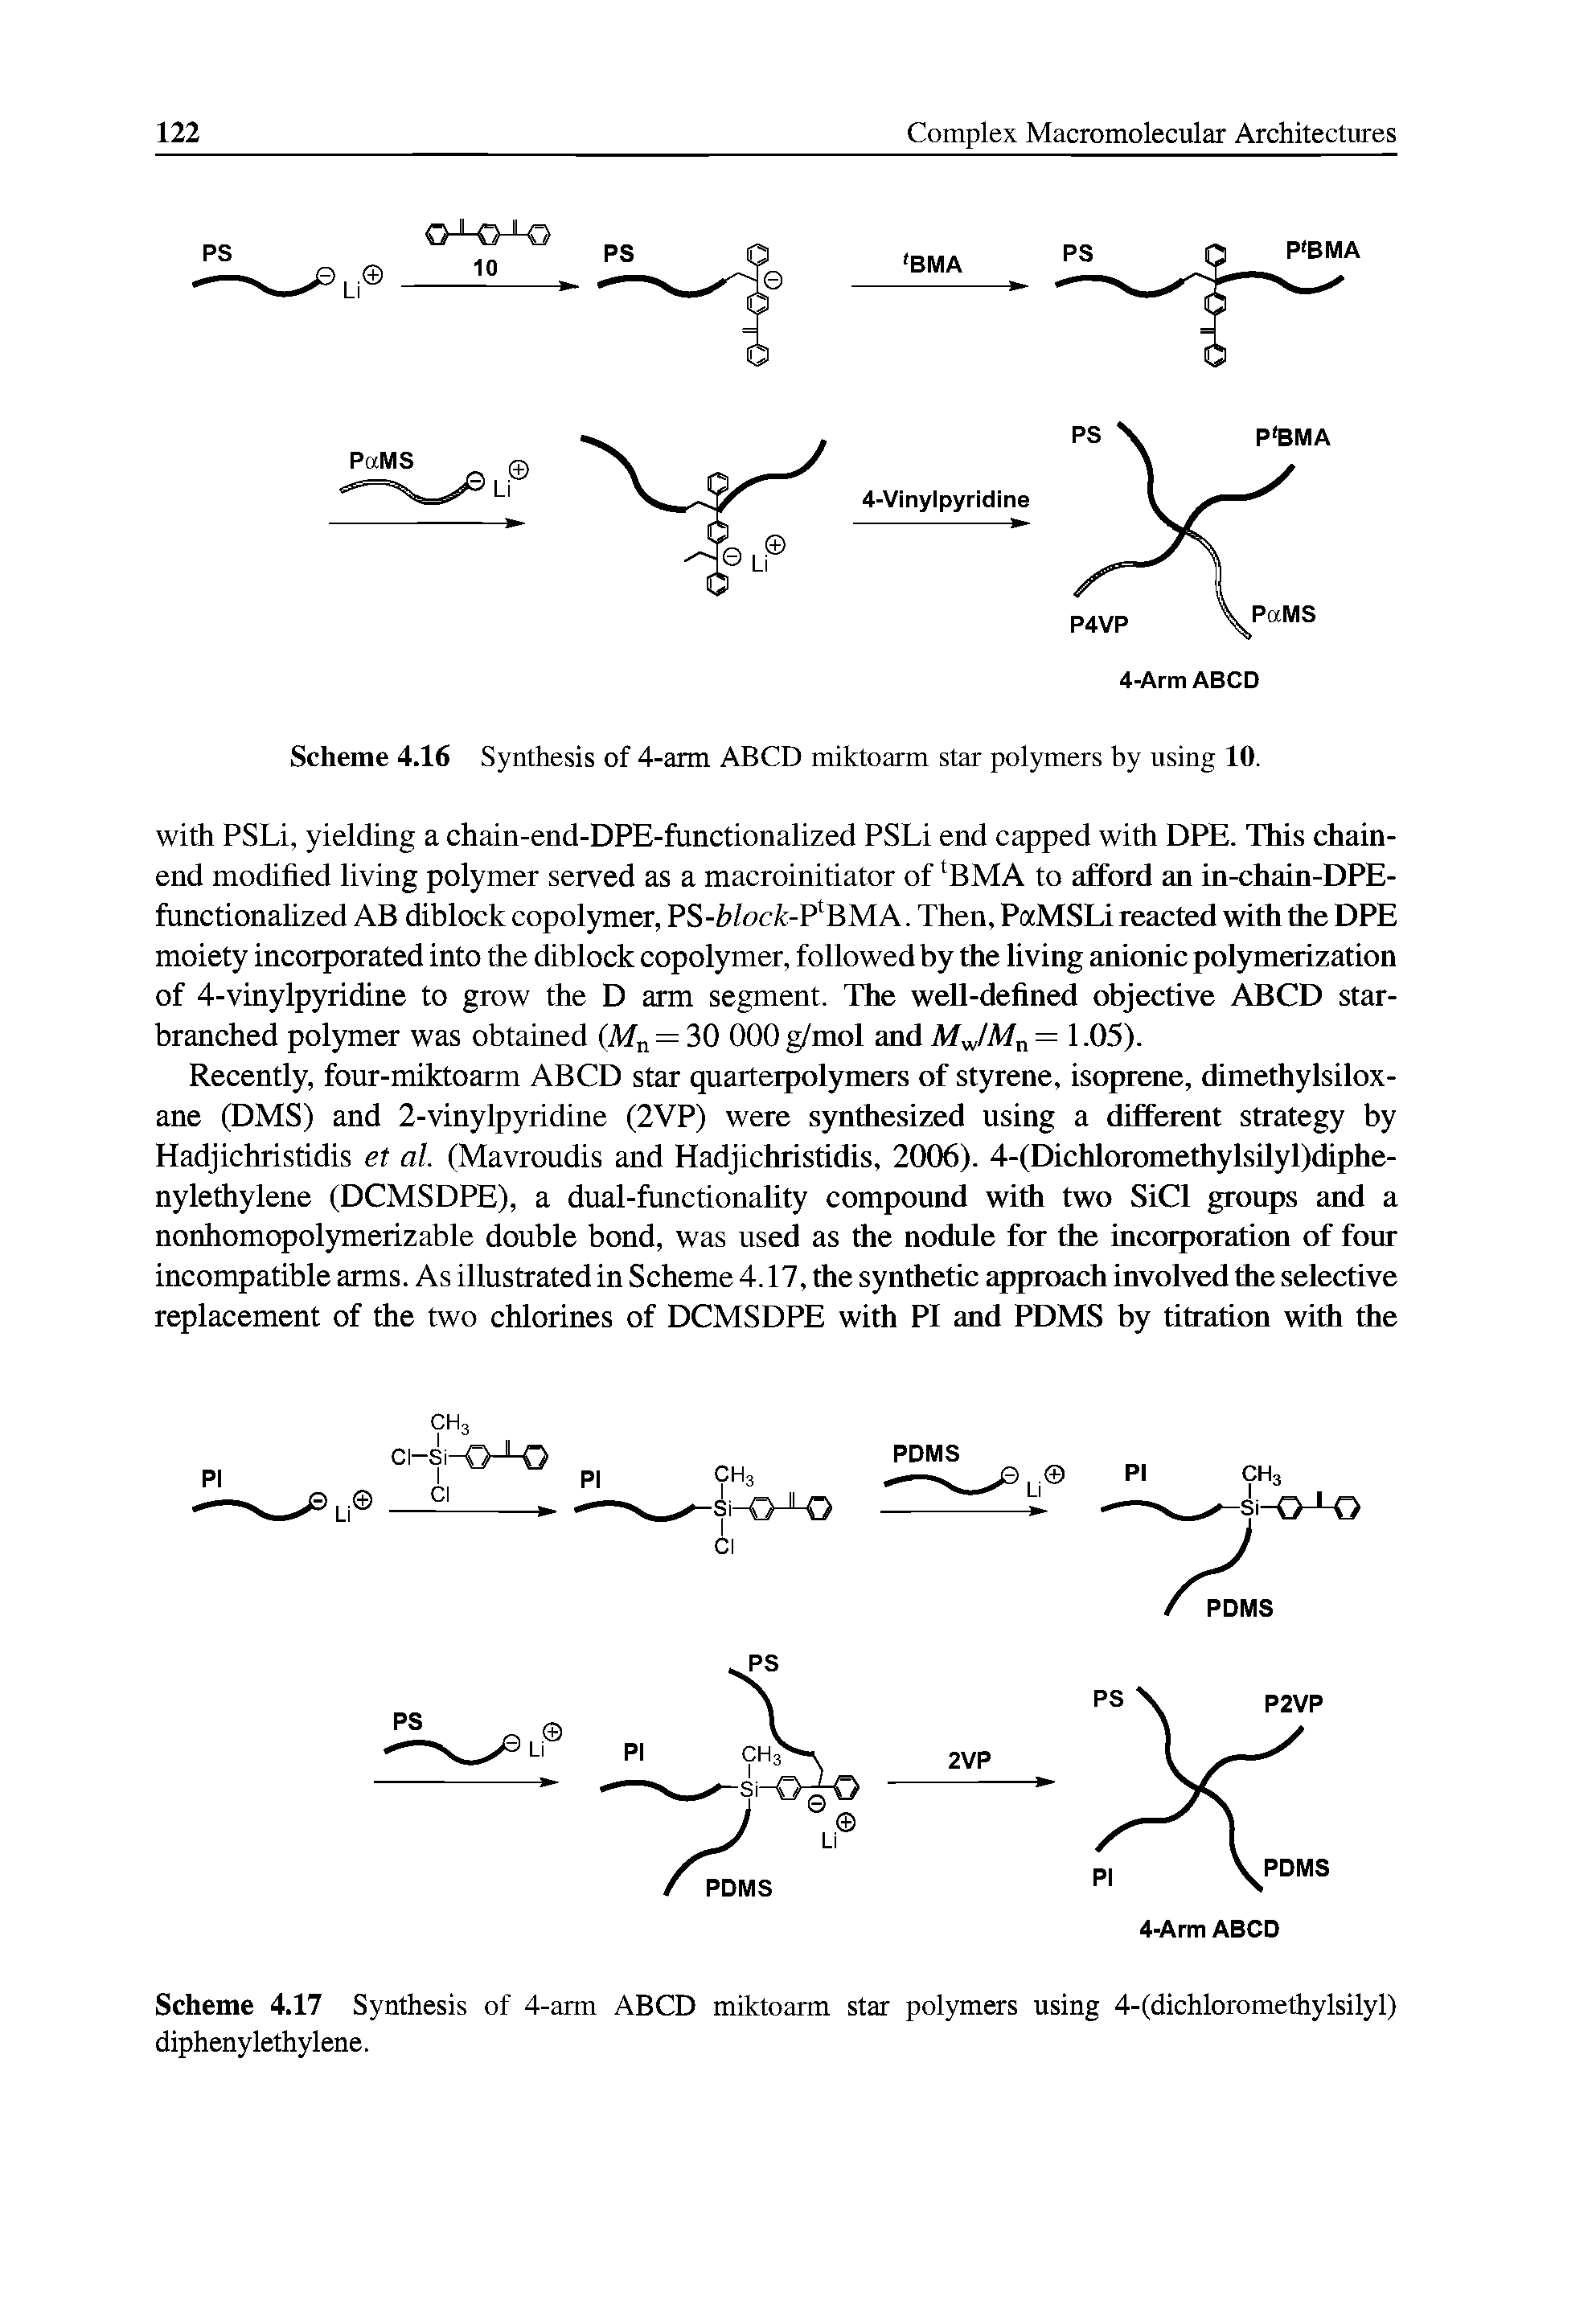 Scheme 4.16 Synthesis of 4-arm ABCD miktoarm star polymers by using 10.